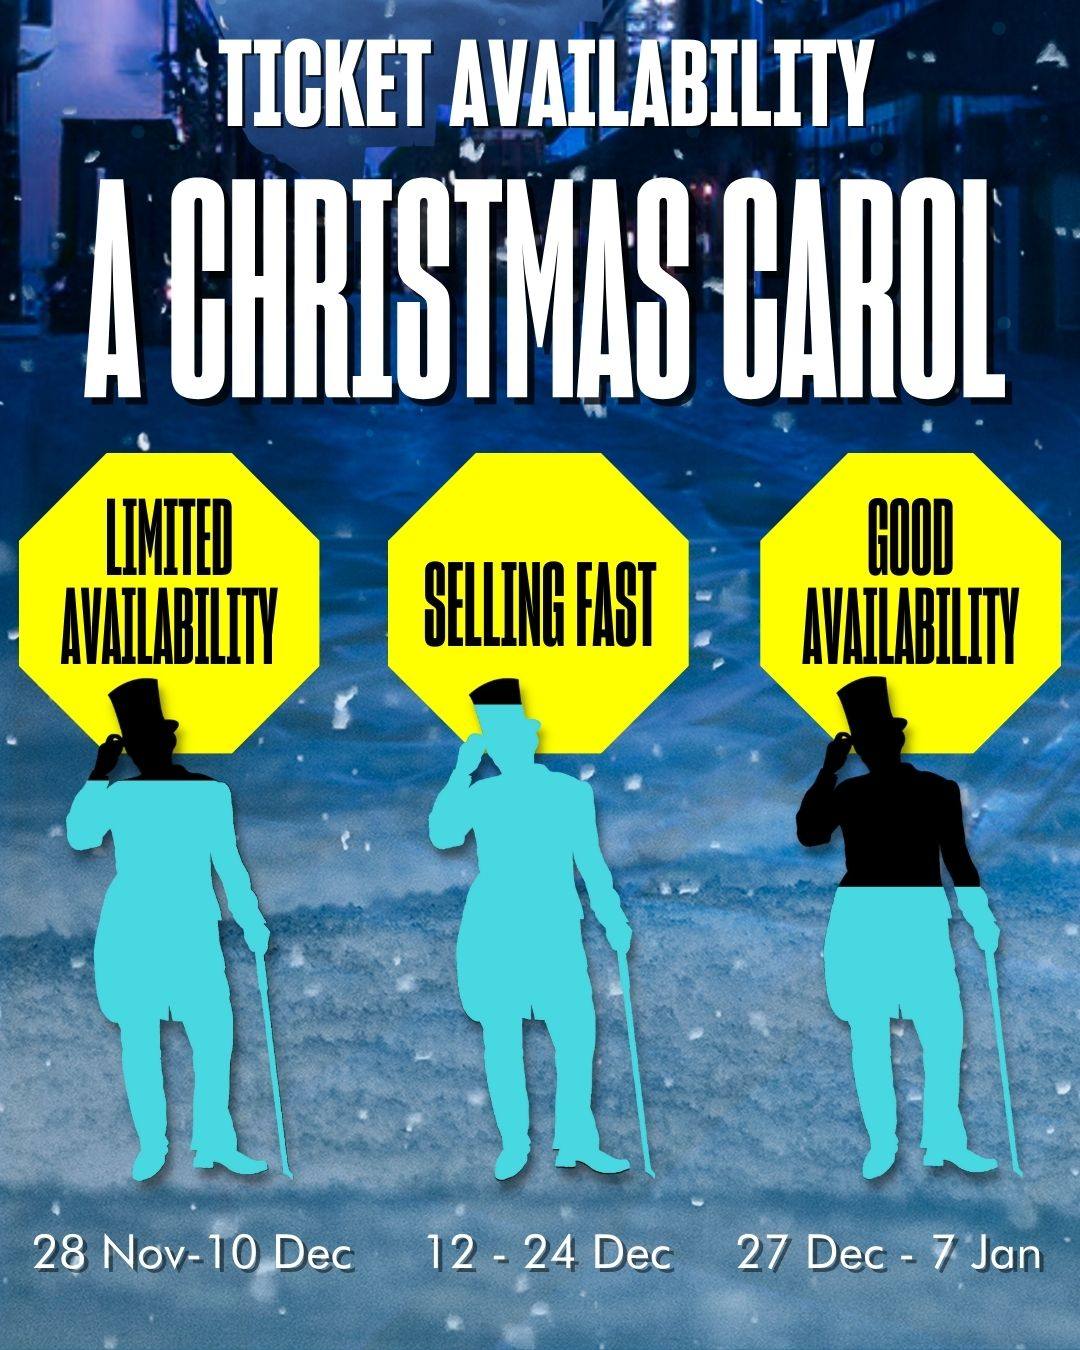 A poster for a performance of A Christmas Carol At Shakespeare North Playhouse in Liverpool.